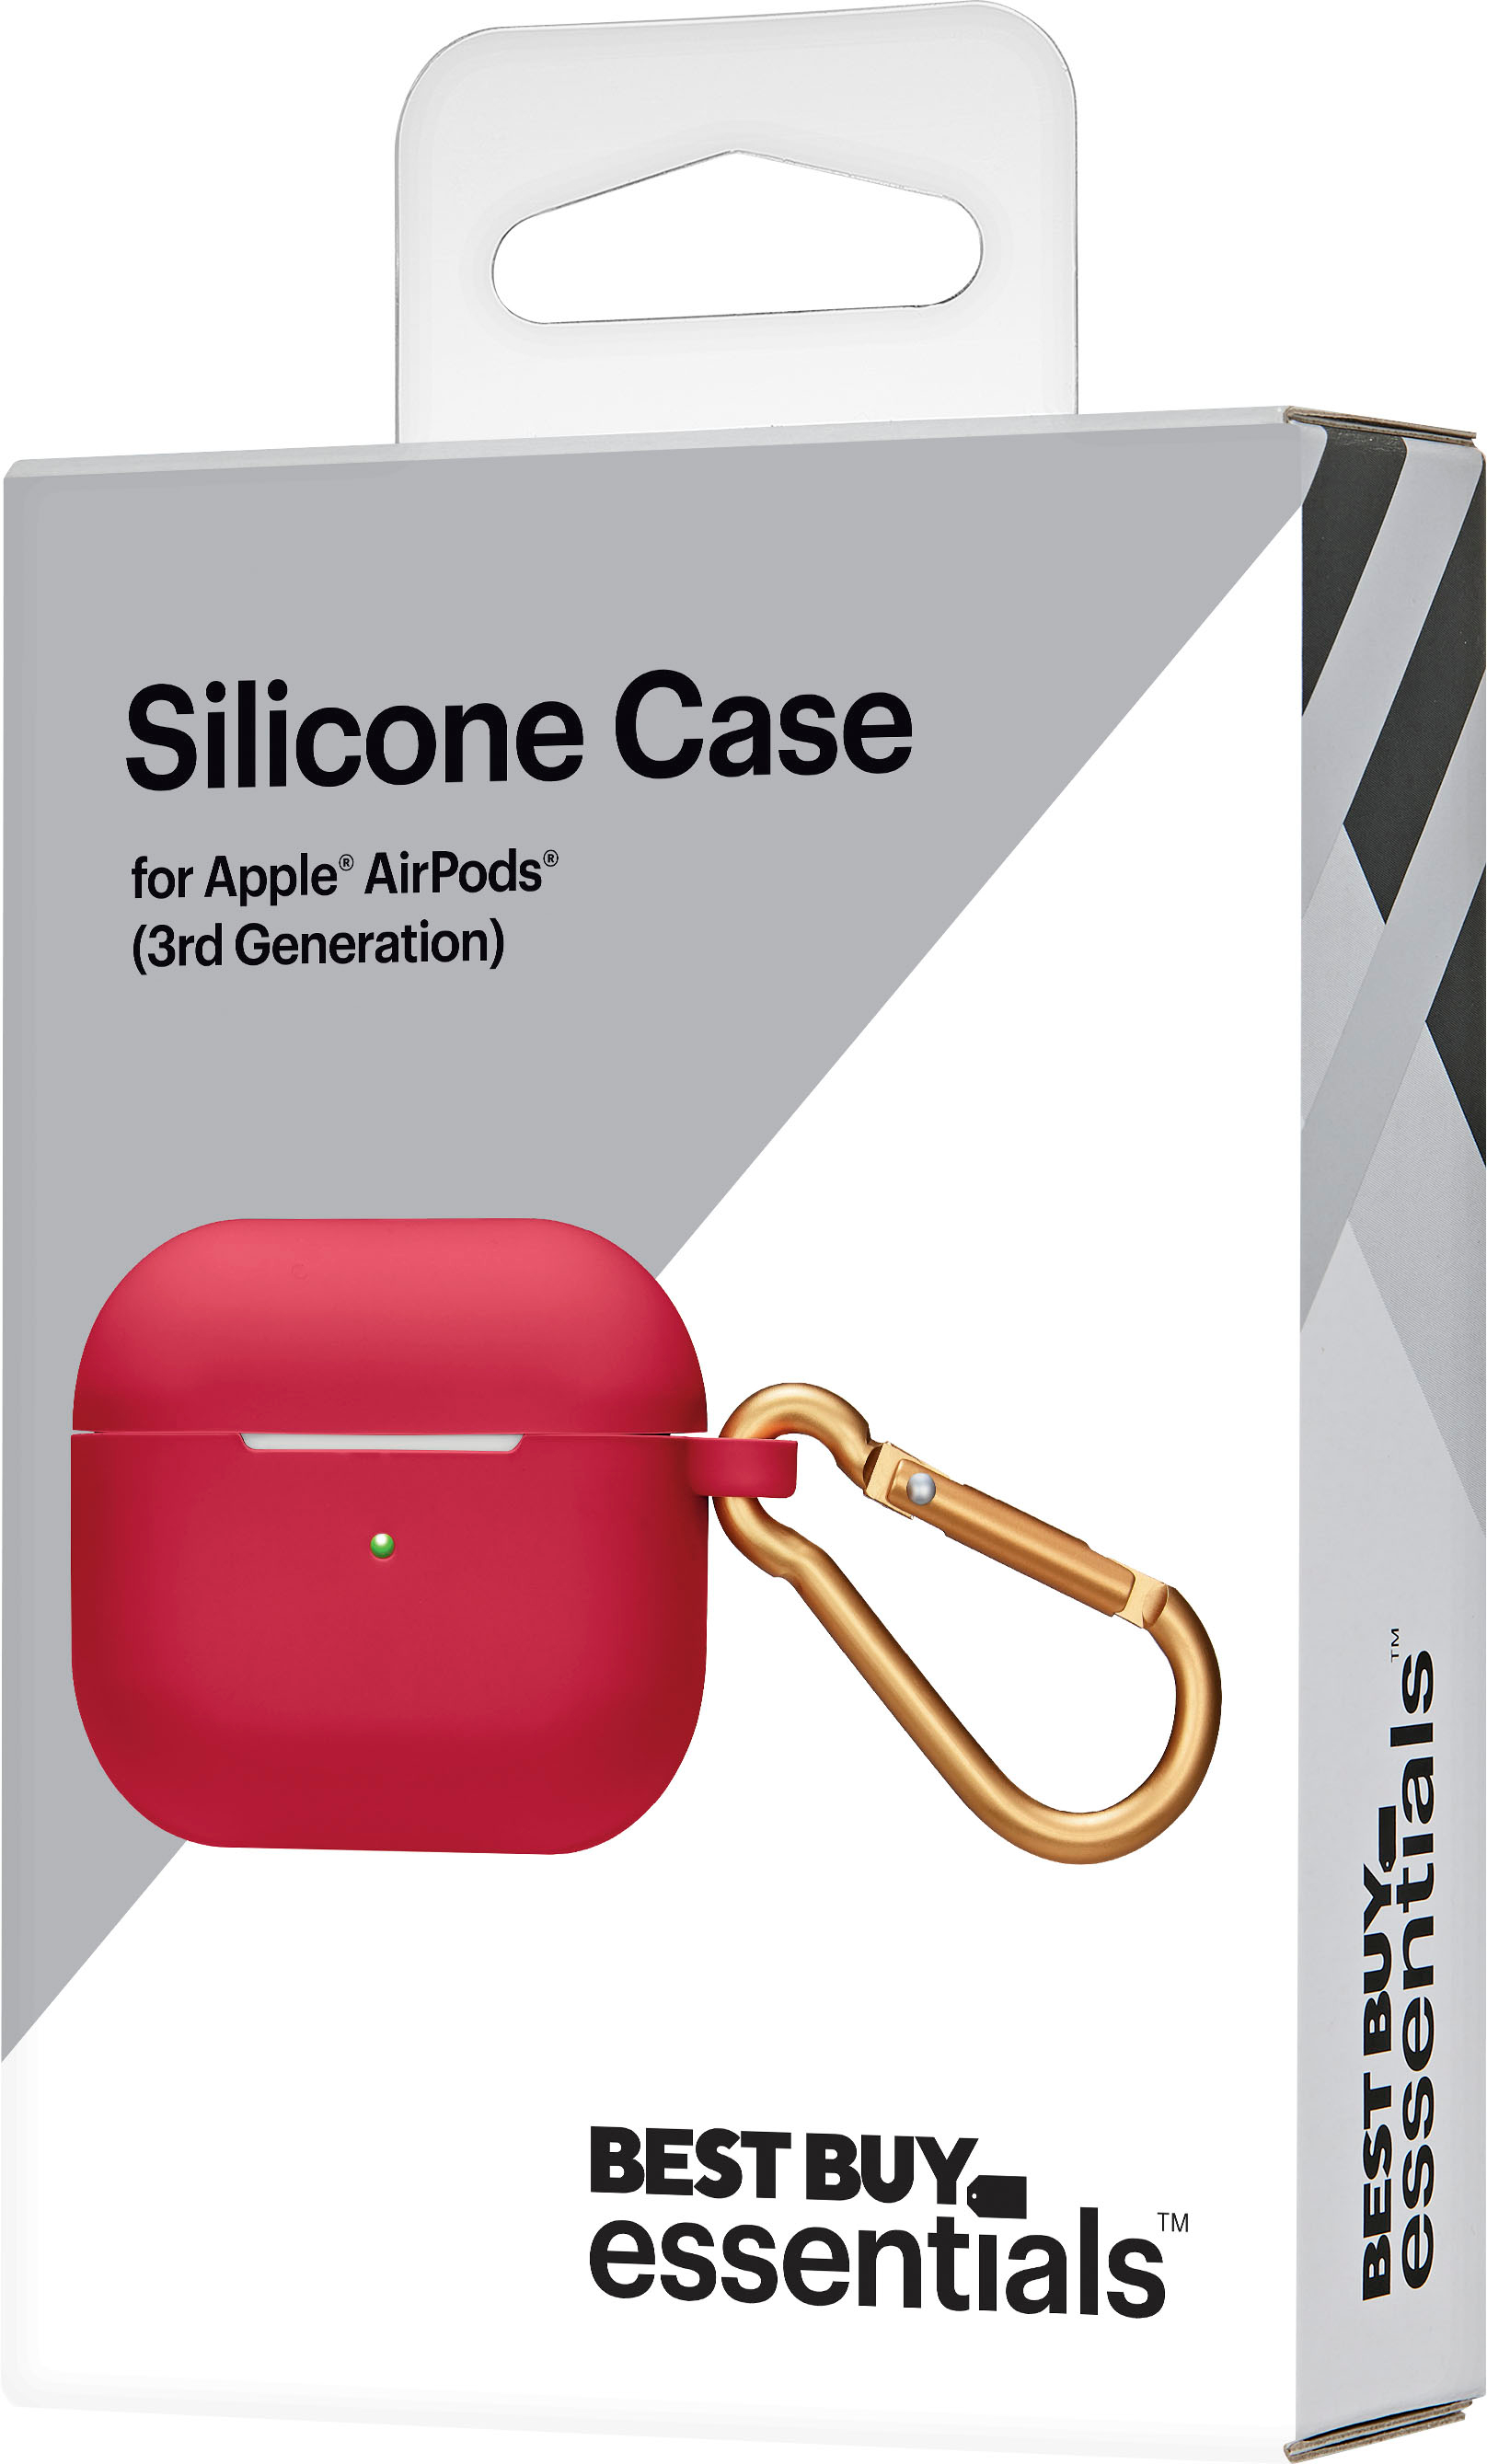 Best Buy essentials™ Silicone Case for Apple AirPods (3rd